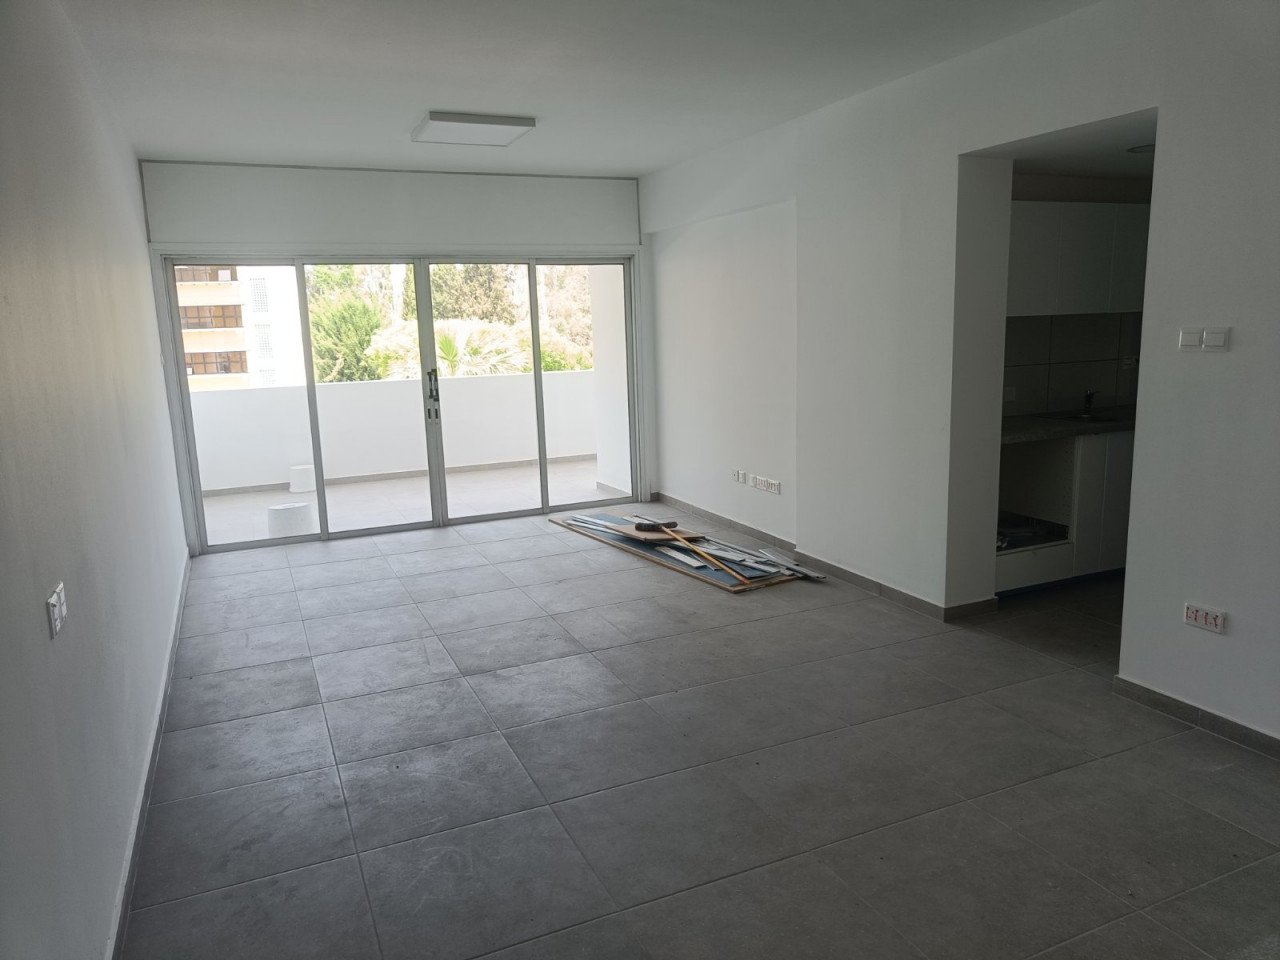 For Sale: Apartment (Flat) in Strovolos, Nicosia for Rent | Key Realtor Cyprus